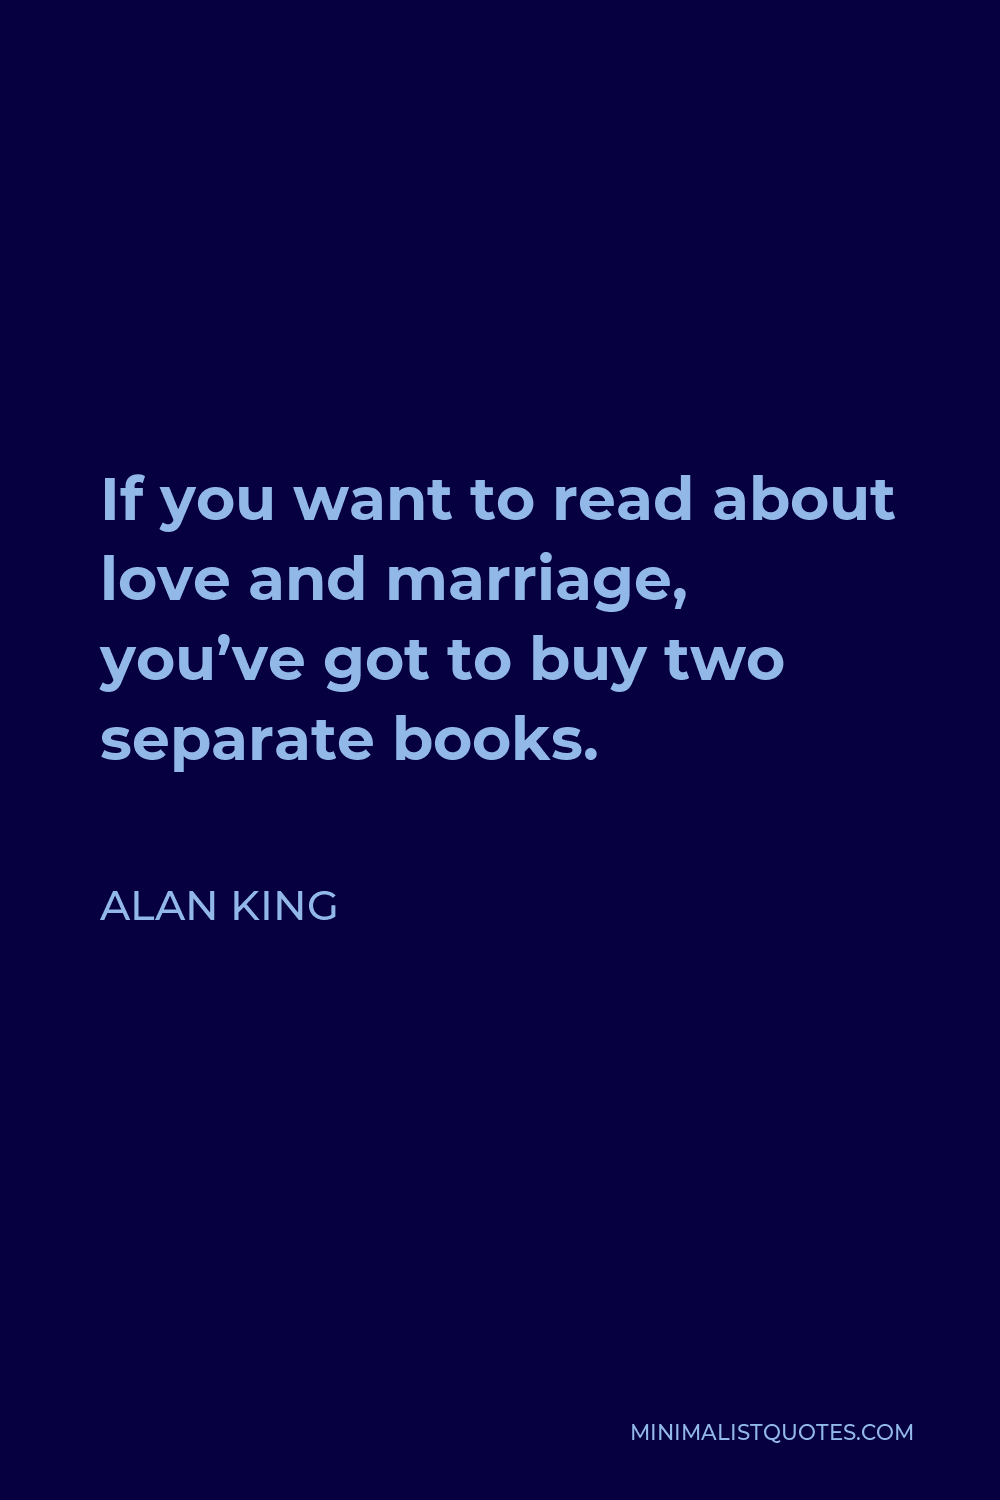 Alan King Quote - If you want to read about love and marriage, you’ve got to buy two separate books.